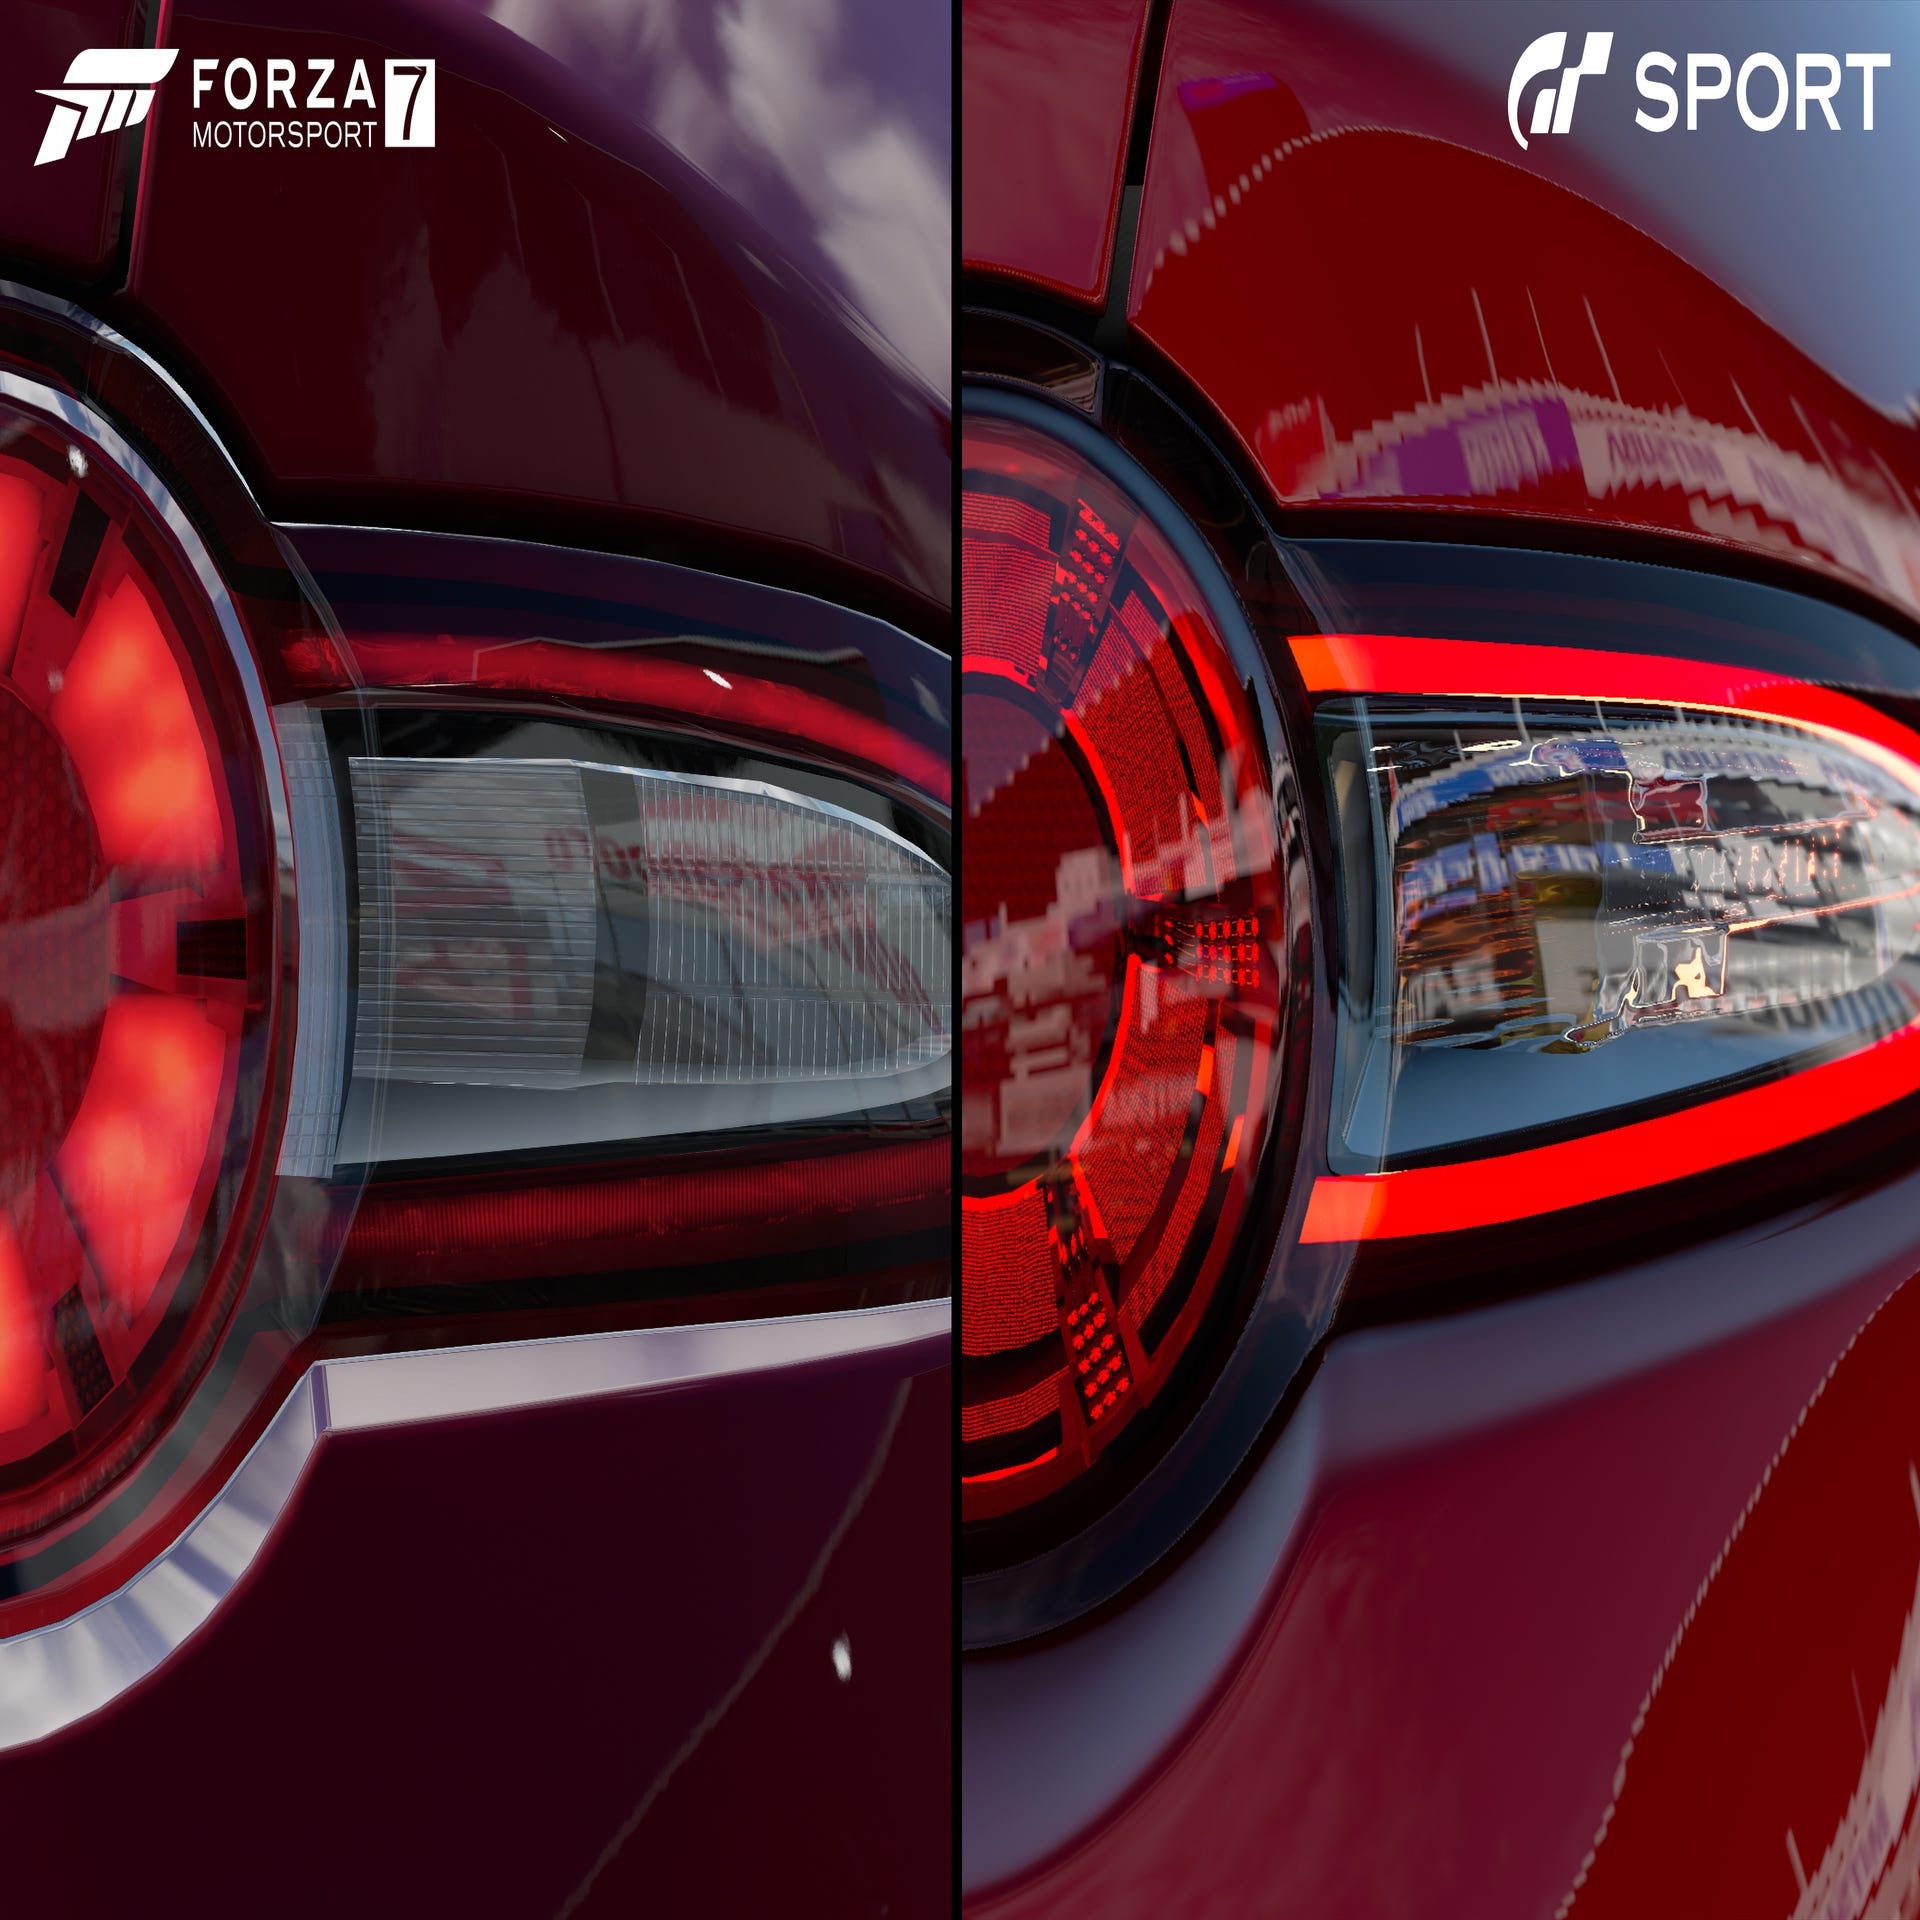 Forza Motorsport 7 Vs. Gran Turismo Sport: Who's King Of The Road?